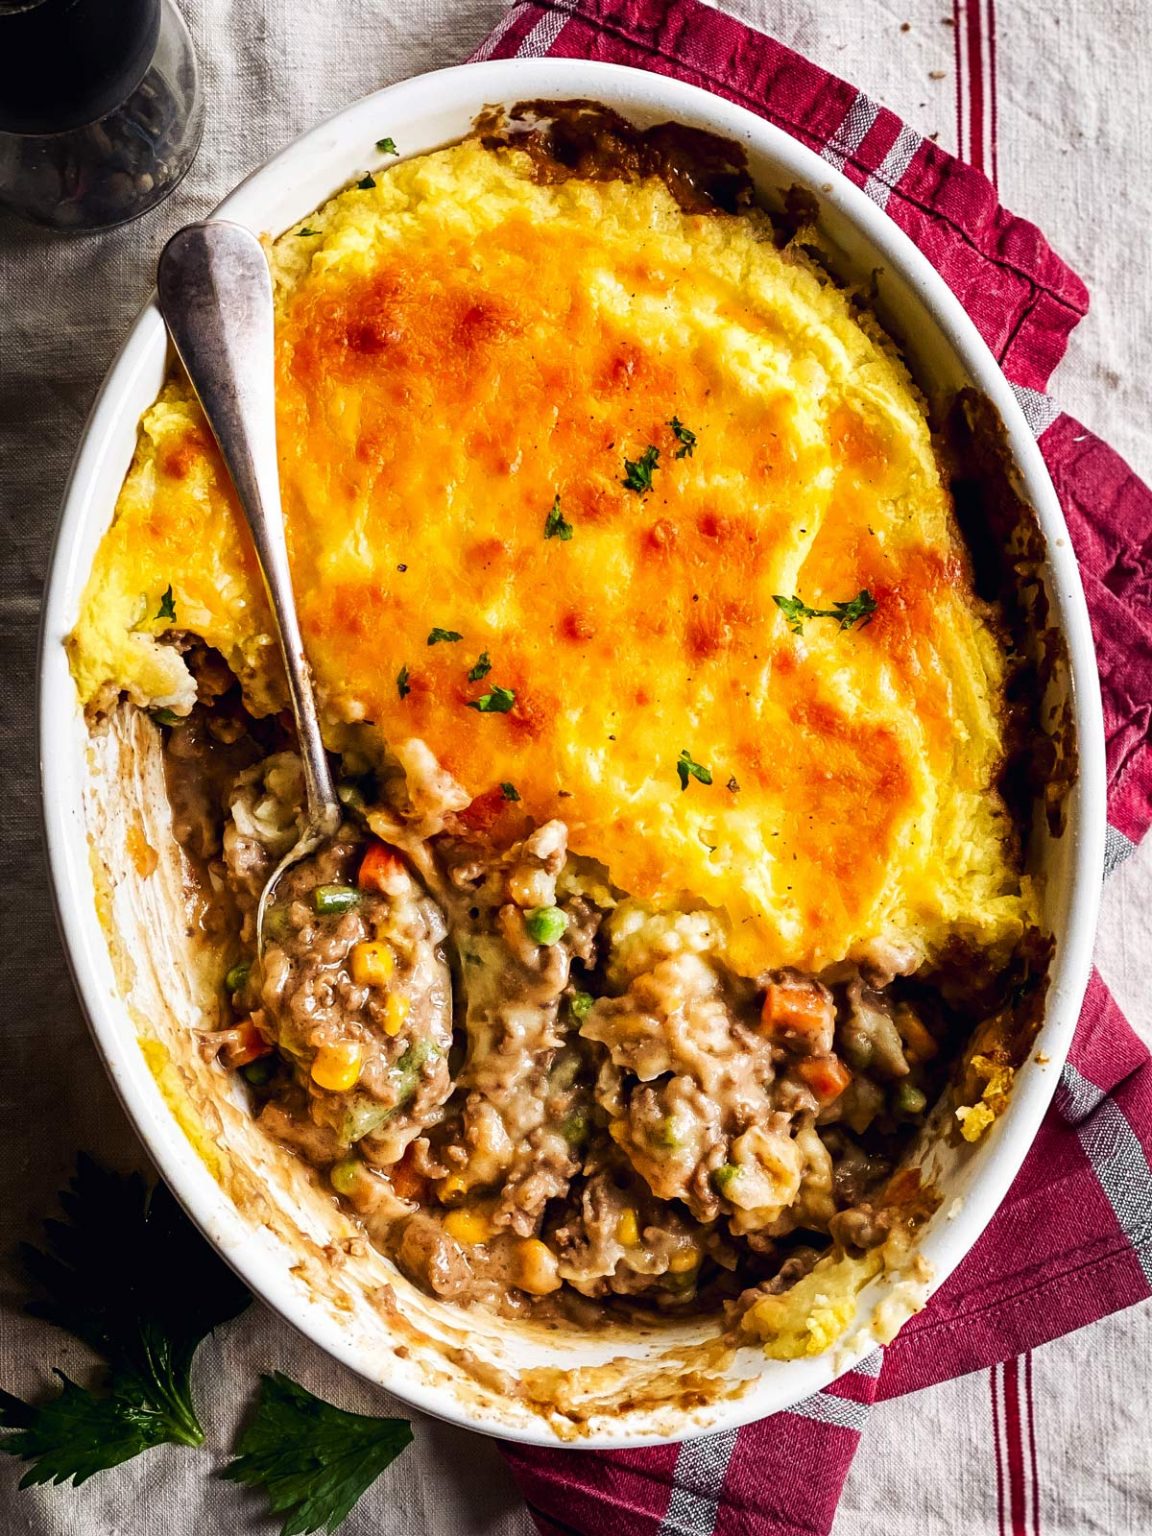 Easy Shepherd's Pie with Instant Mashed Potatoes Recipe - Unfussy Kitchen